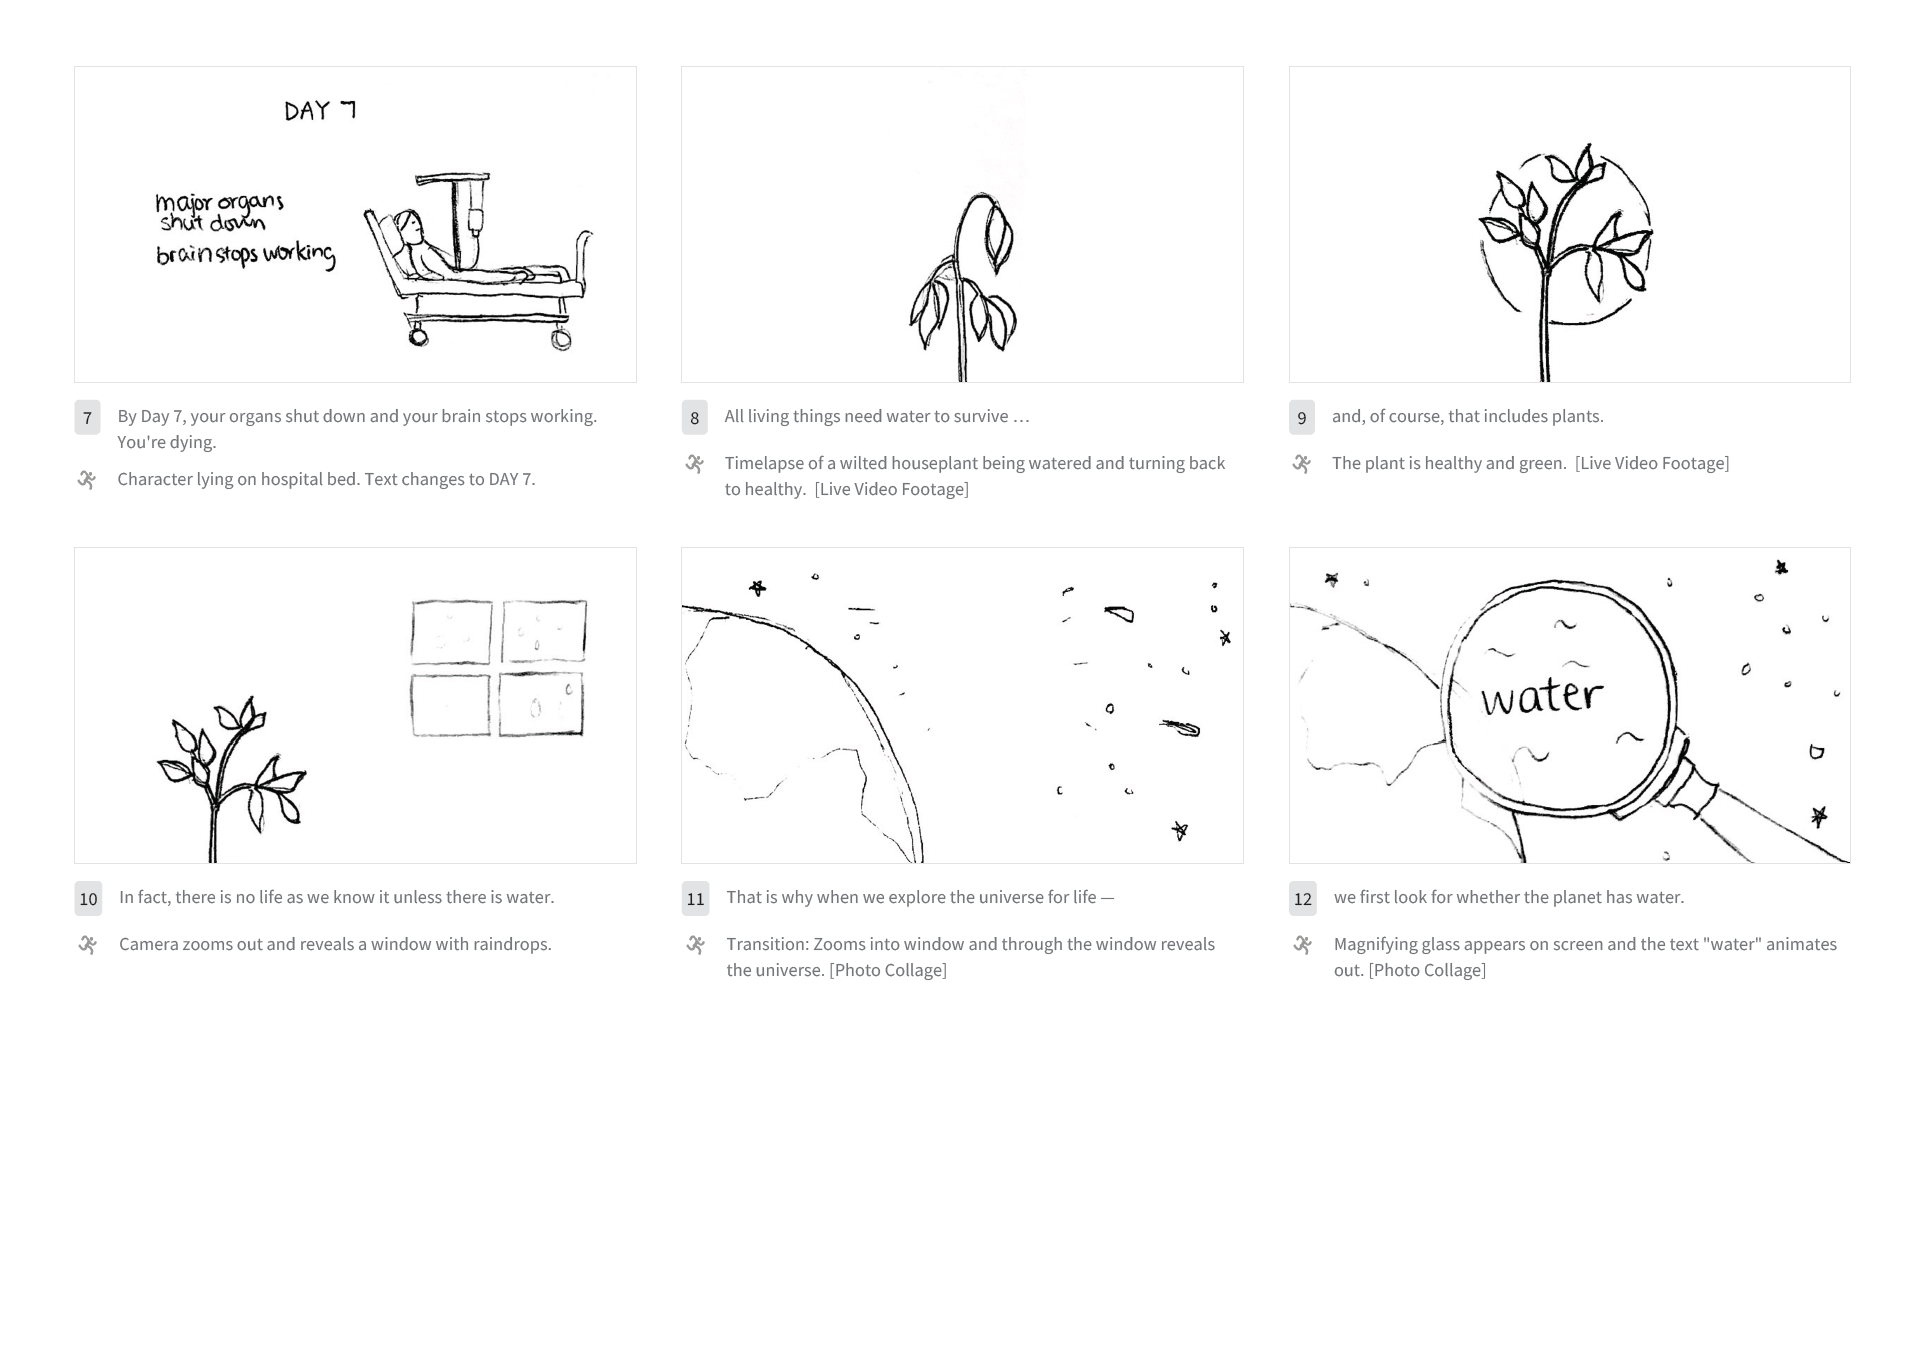 ucla-ioes-storyboard1.png